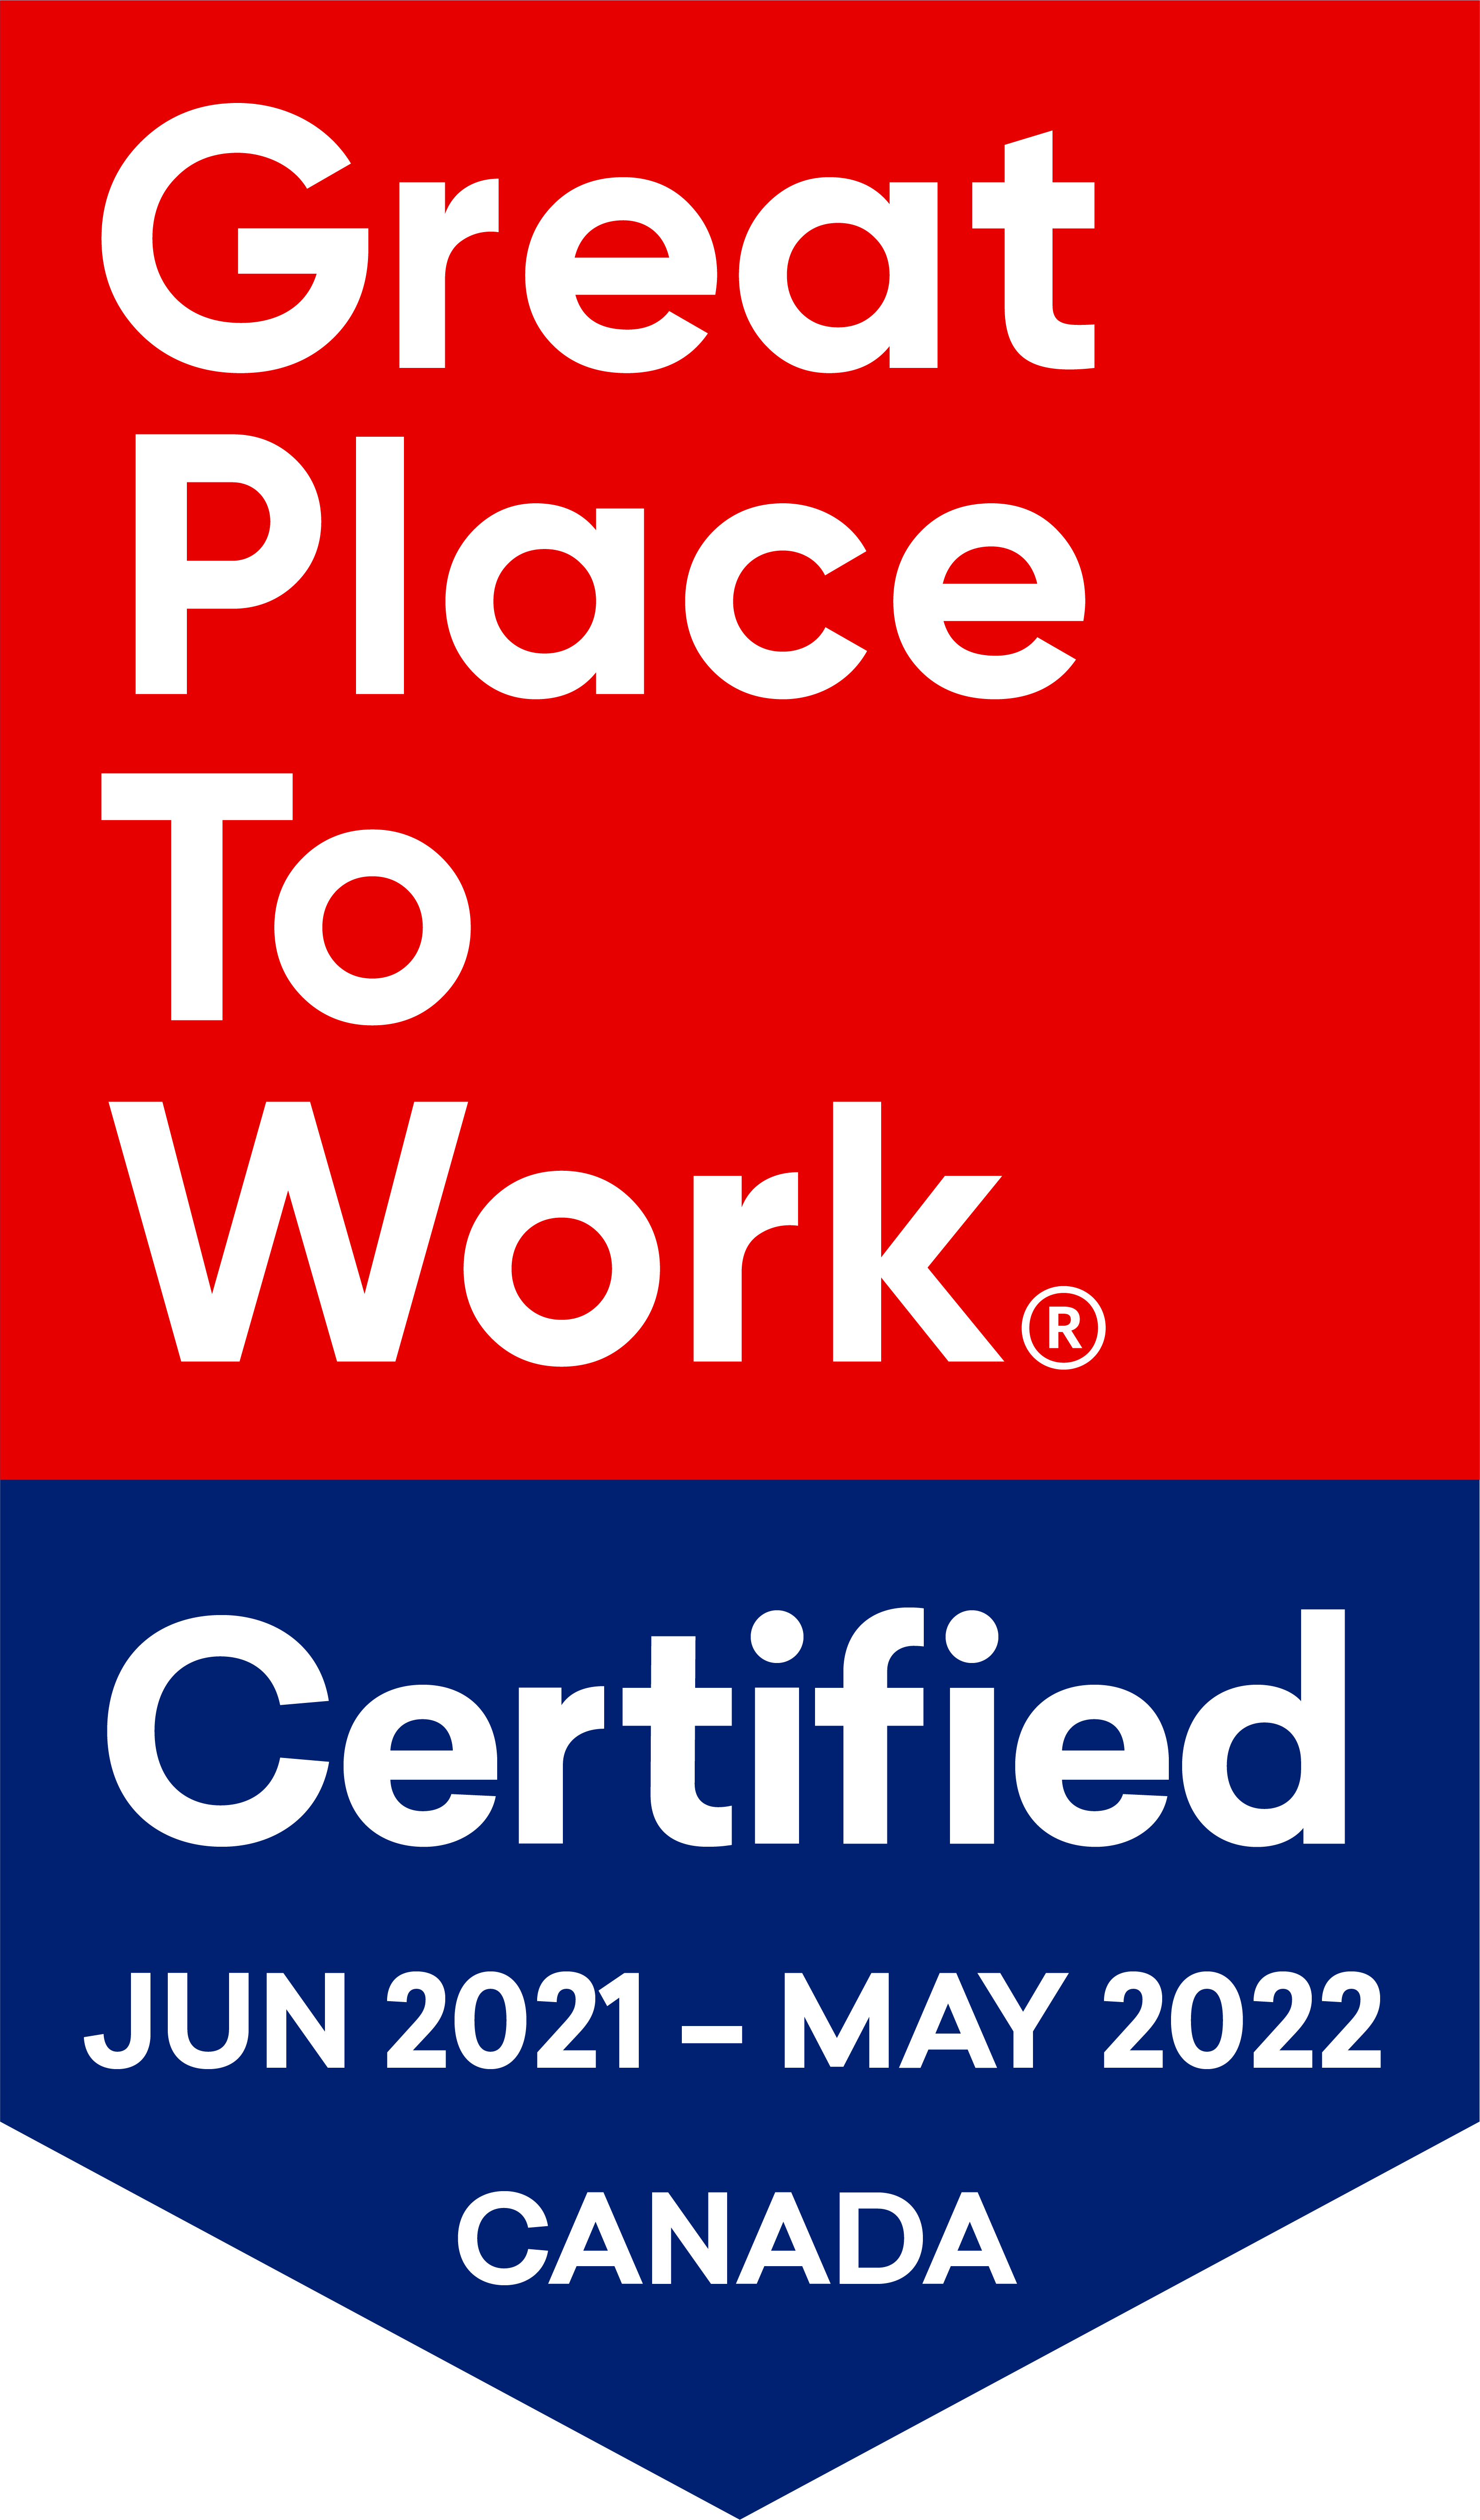 Great Place to Work Certified 2021-2022